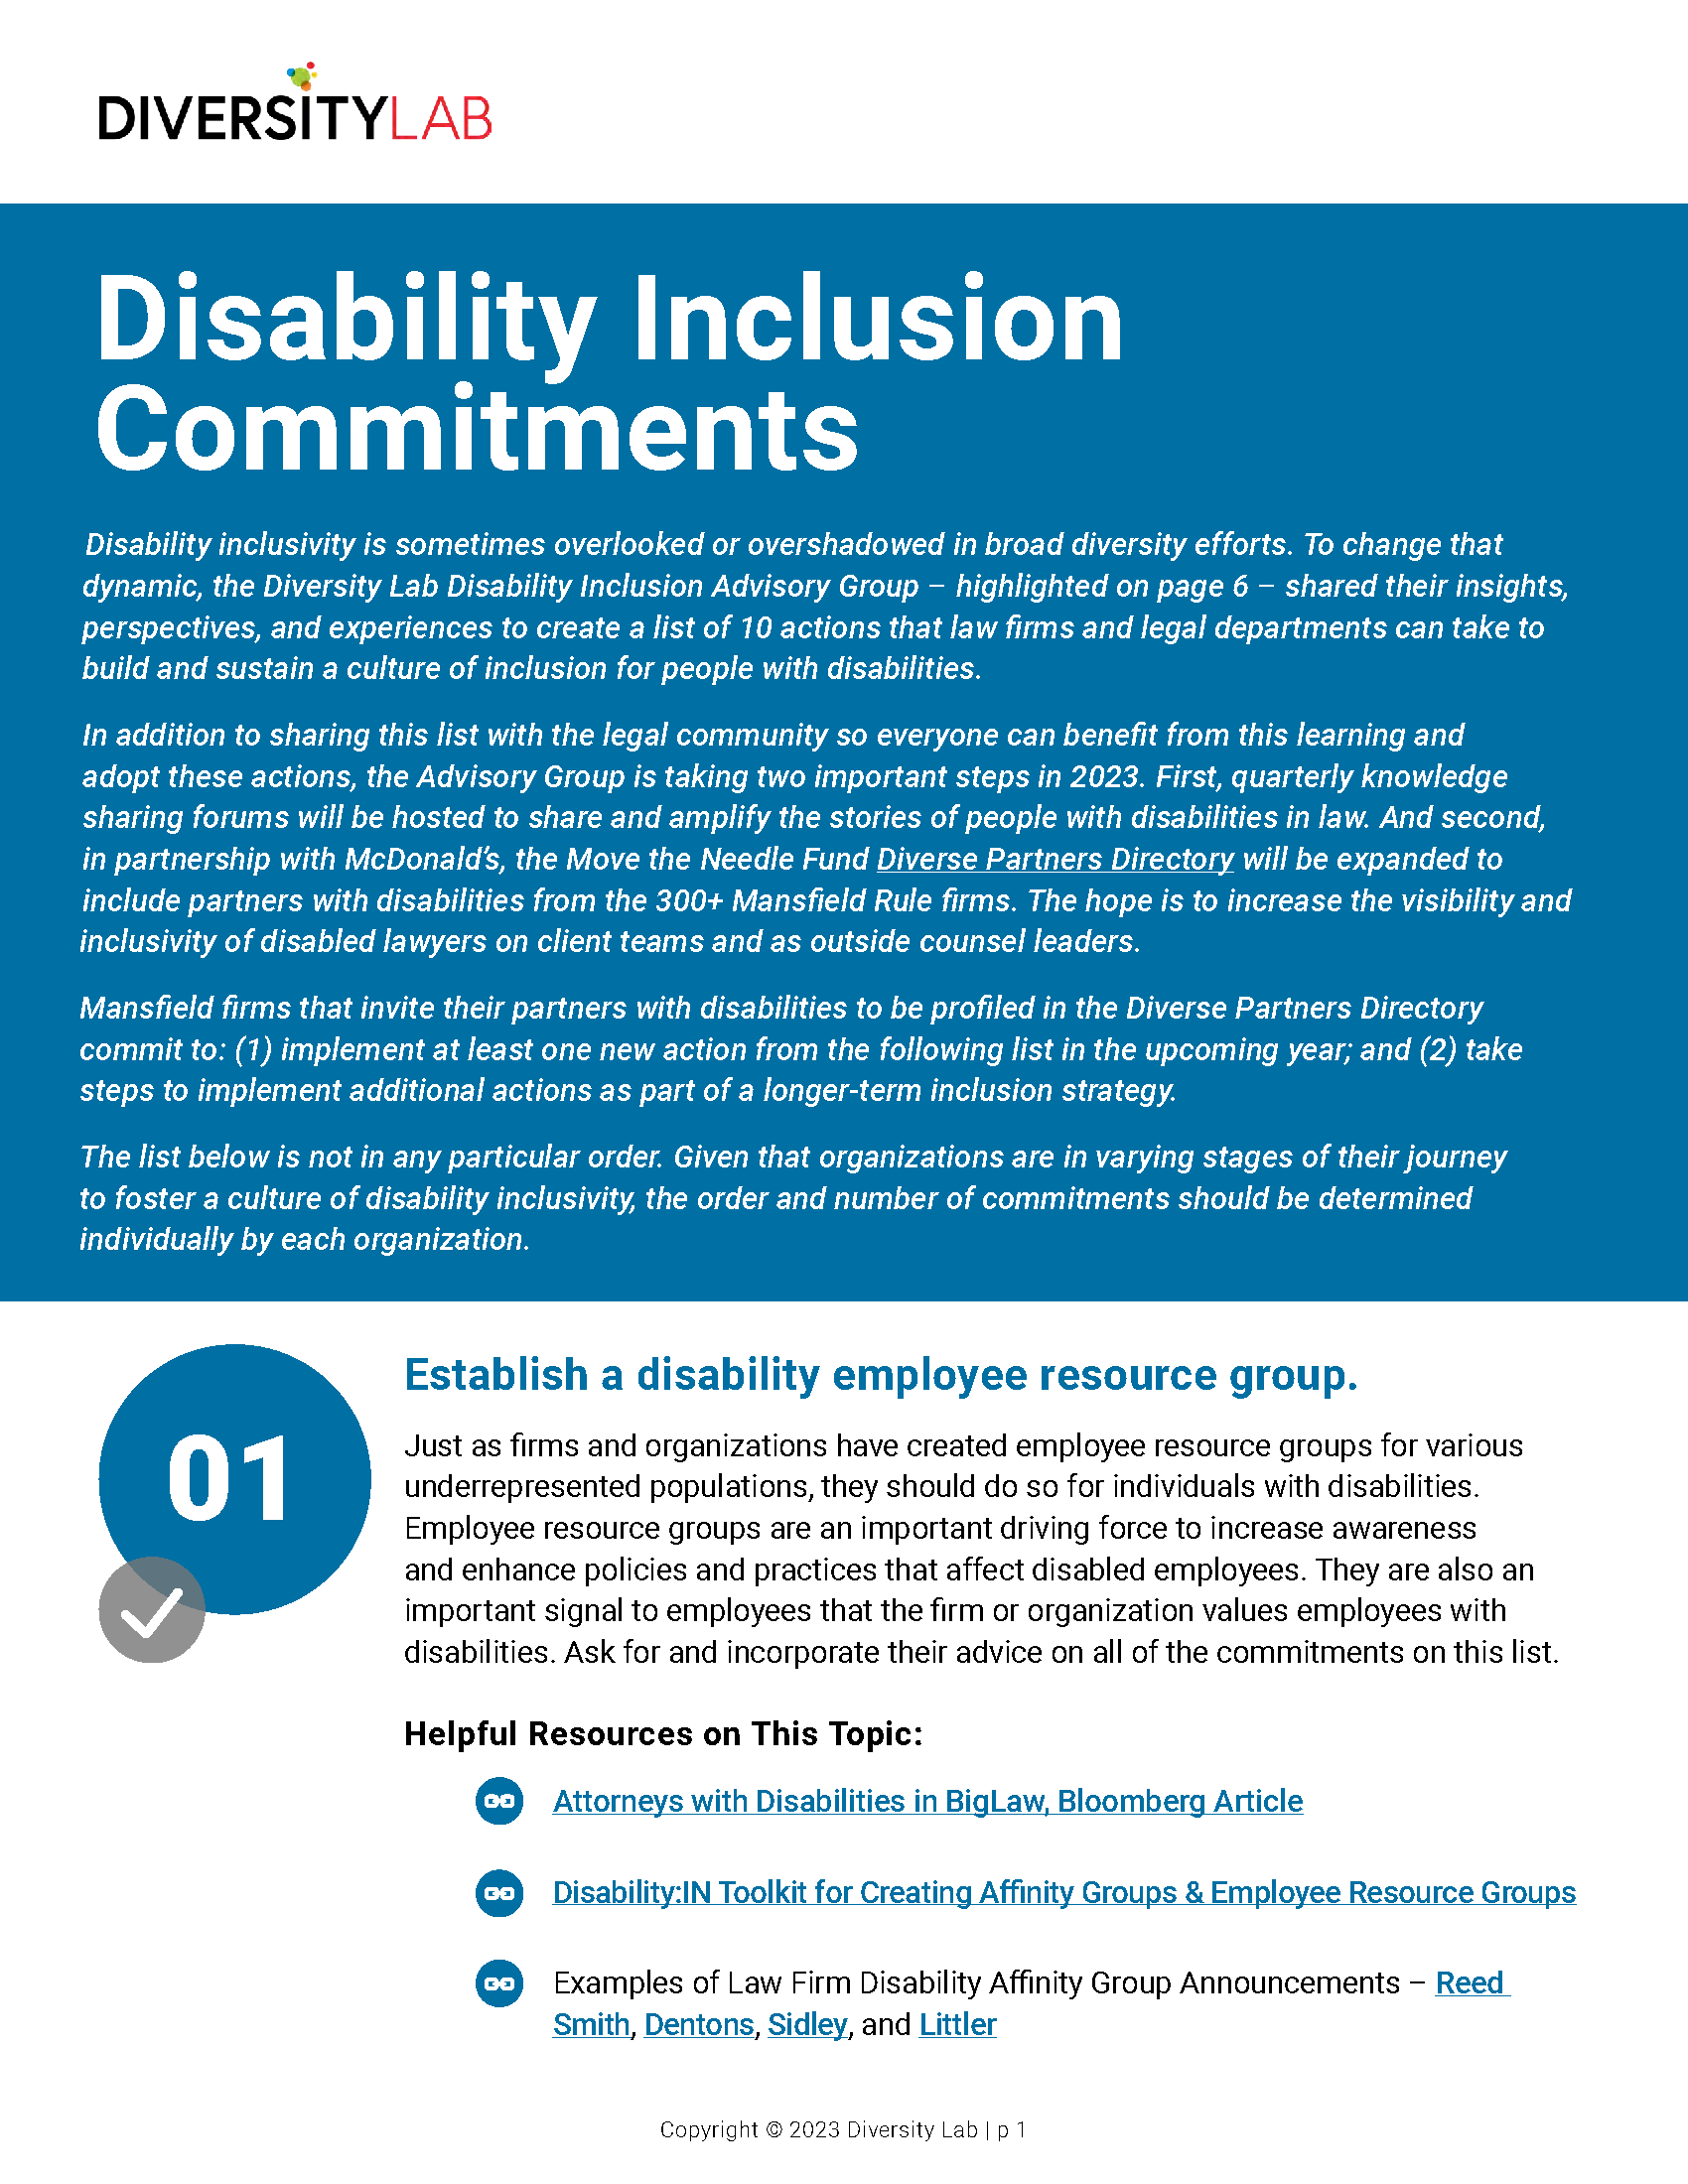 This is an image of the Disability Inclusion Commitments List. A link to the text can be accessed by clicking on the image itself. 